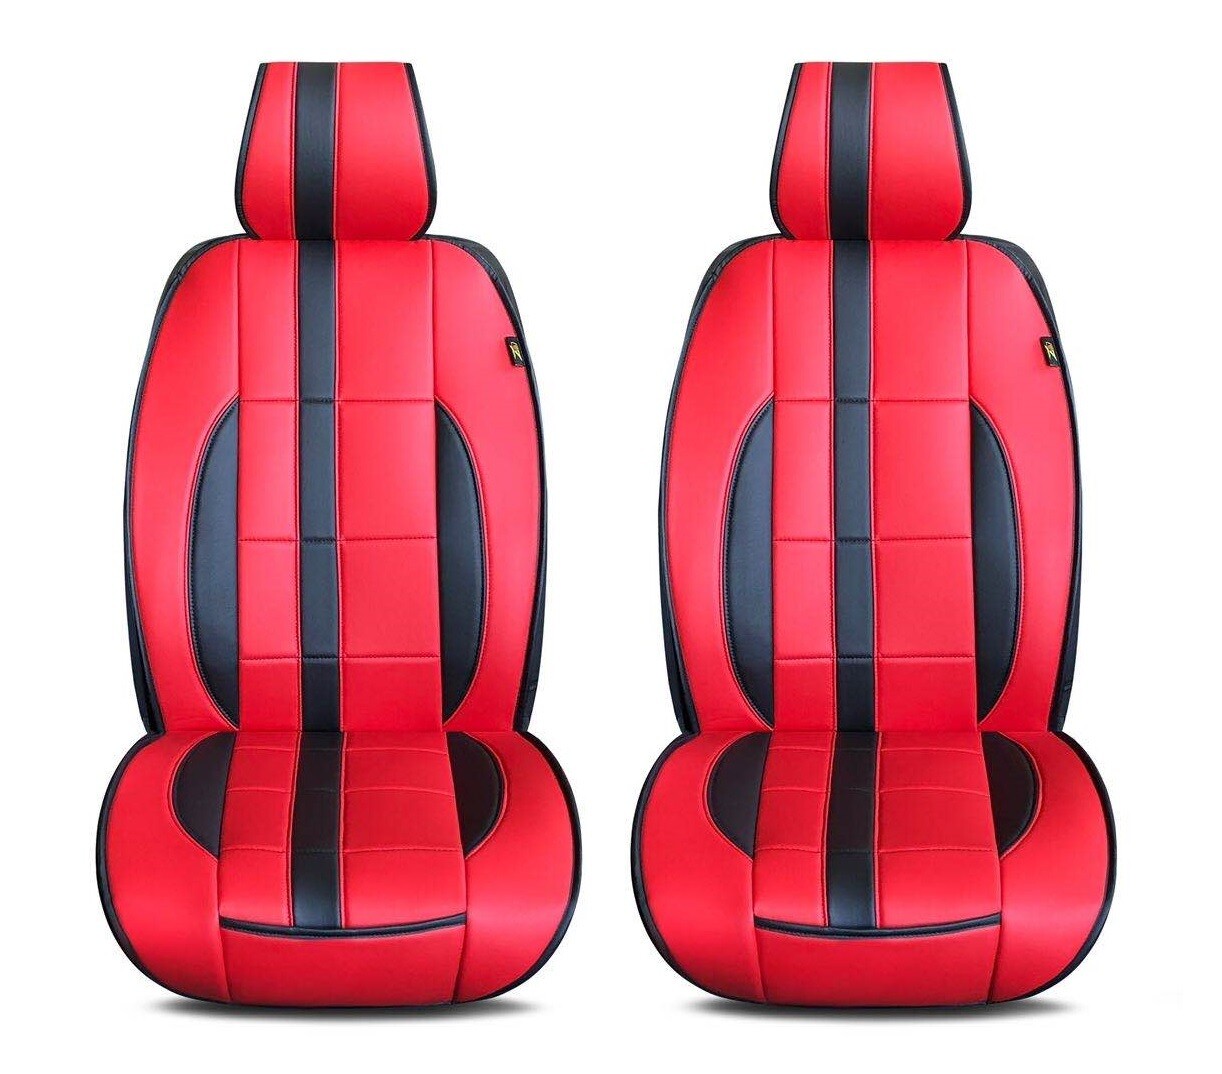 Universal PU Leather Car Seat Cover Cushion for Front Seat - 2 Pair - Red